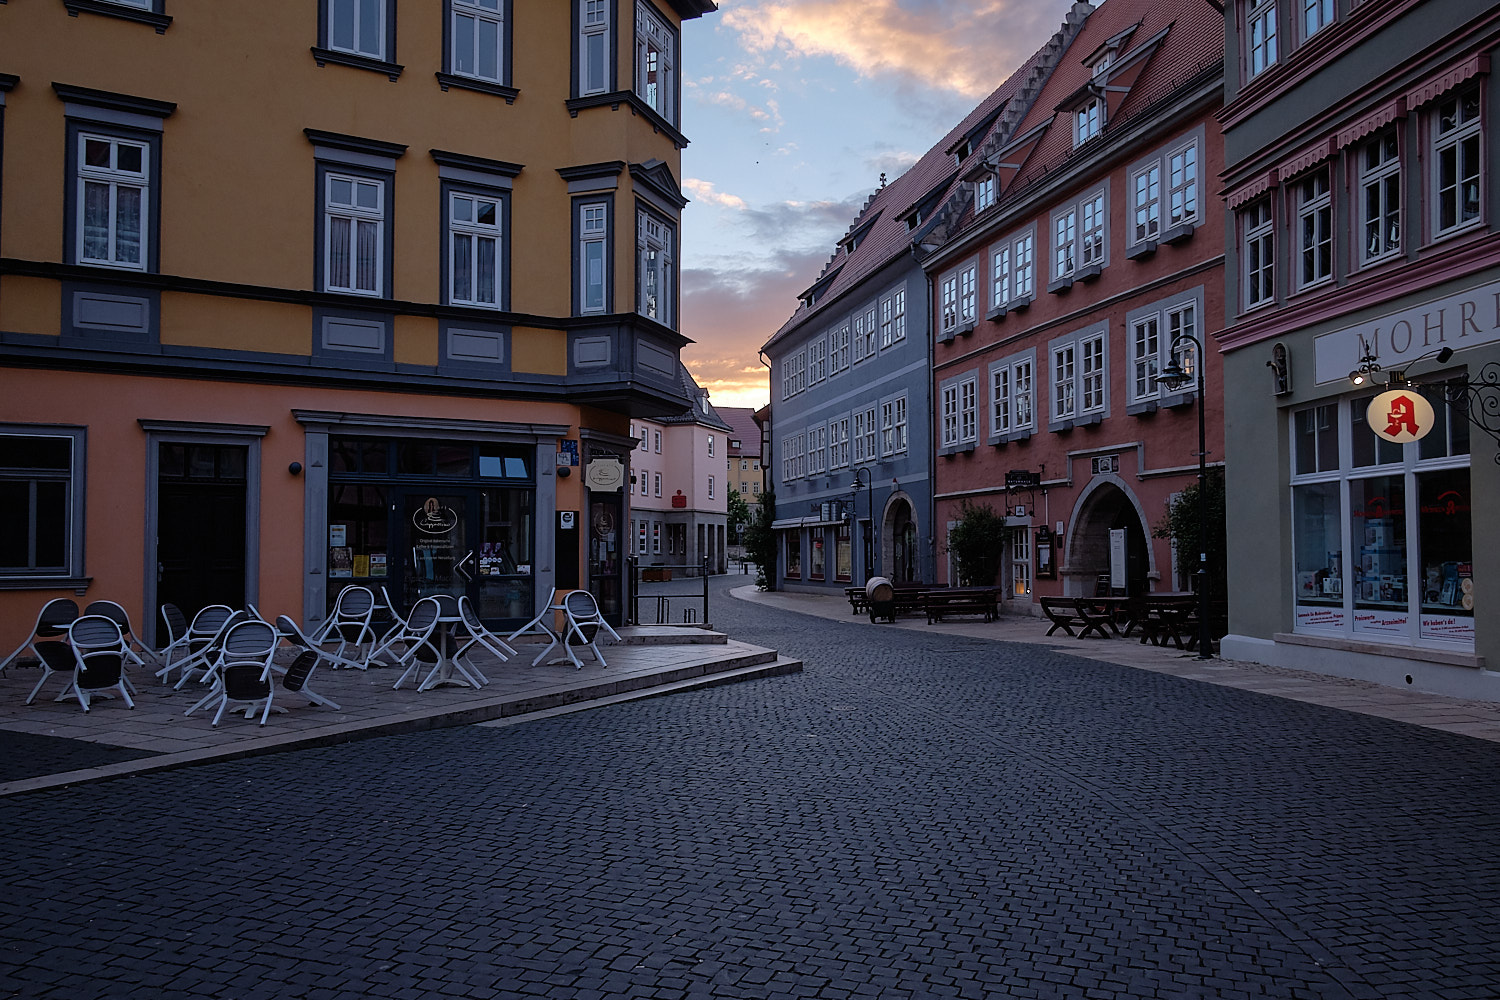 Pedestrian zone and buildings facades of Bad Langensalza, Germany